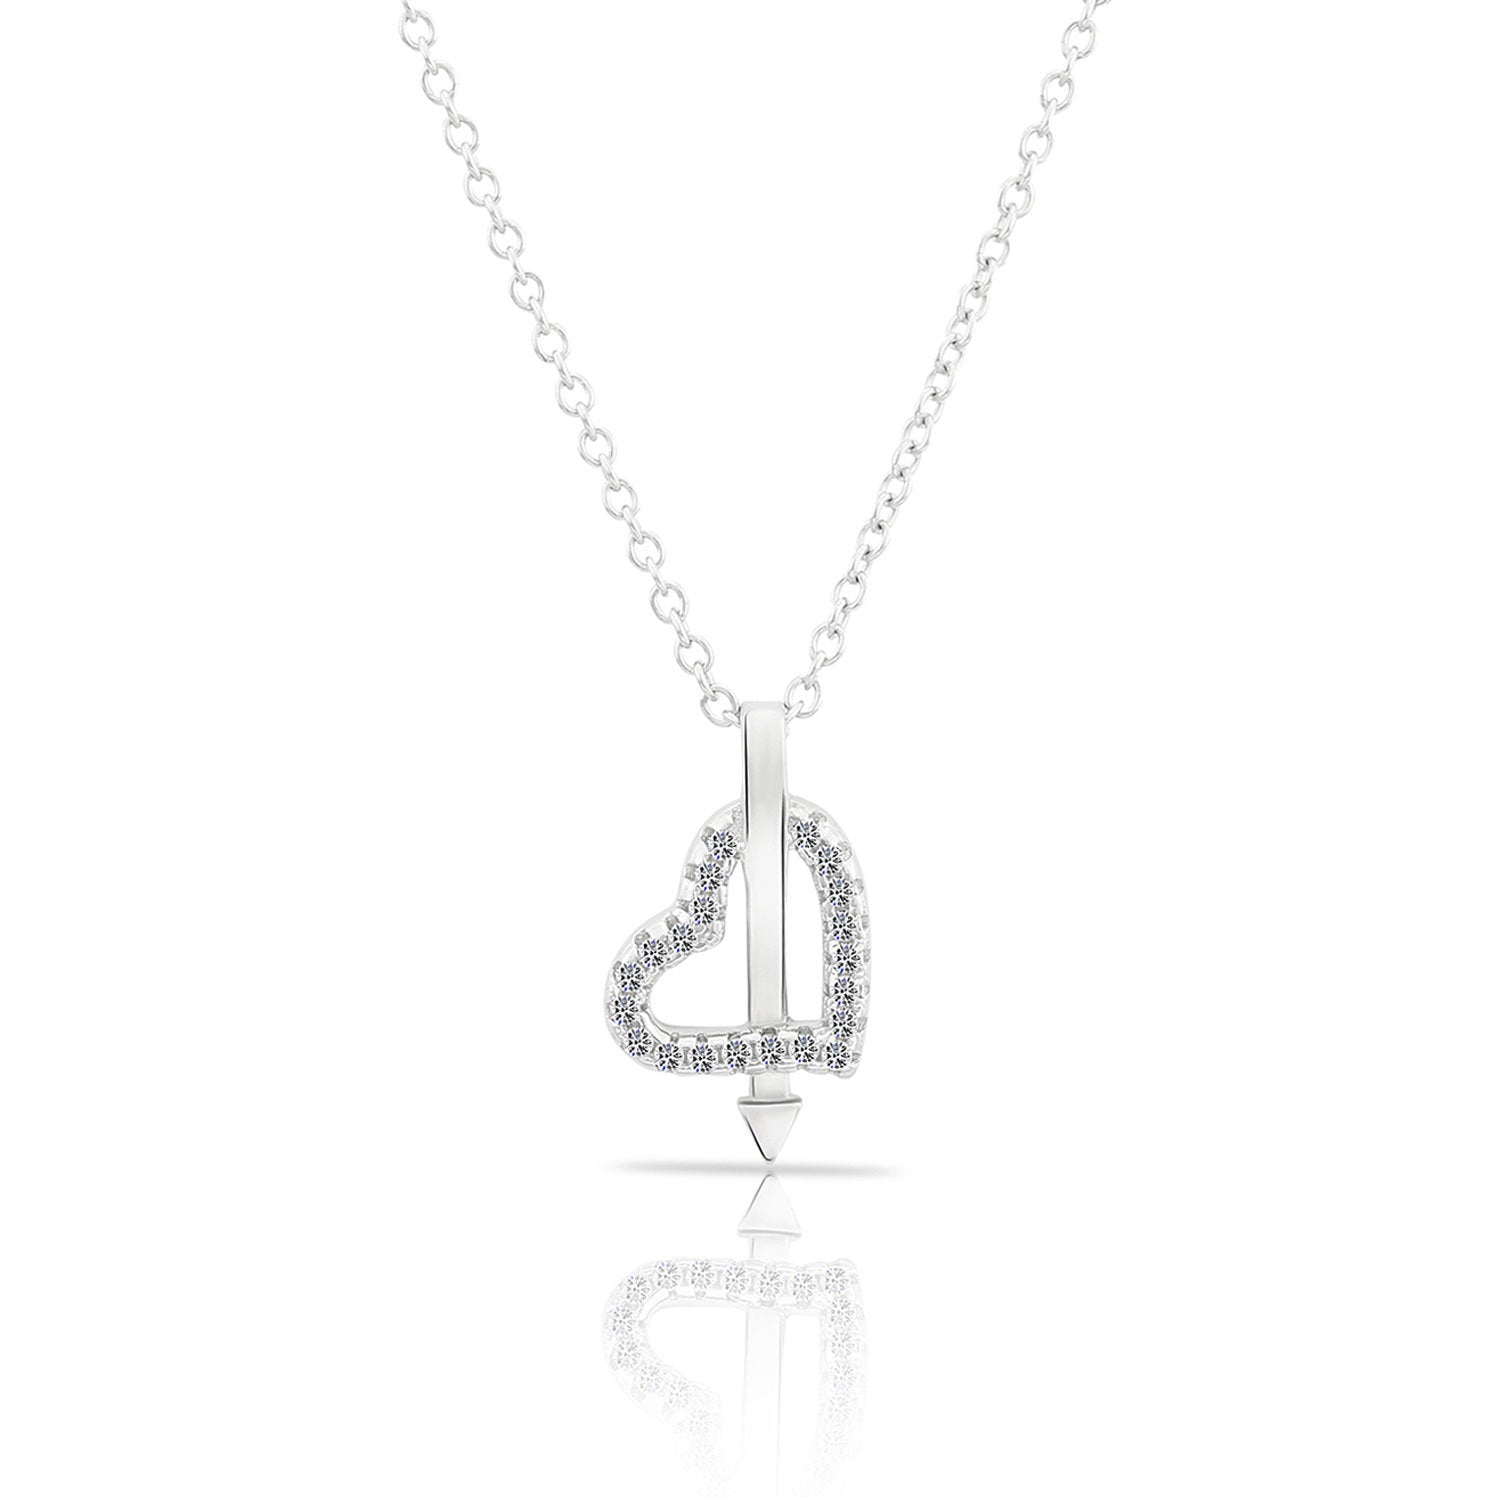 Sterling Silver Arrow Heart Charm Necklace